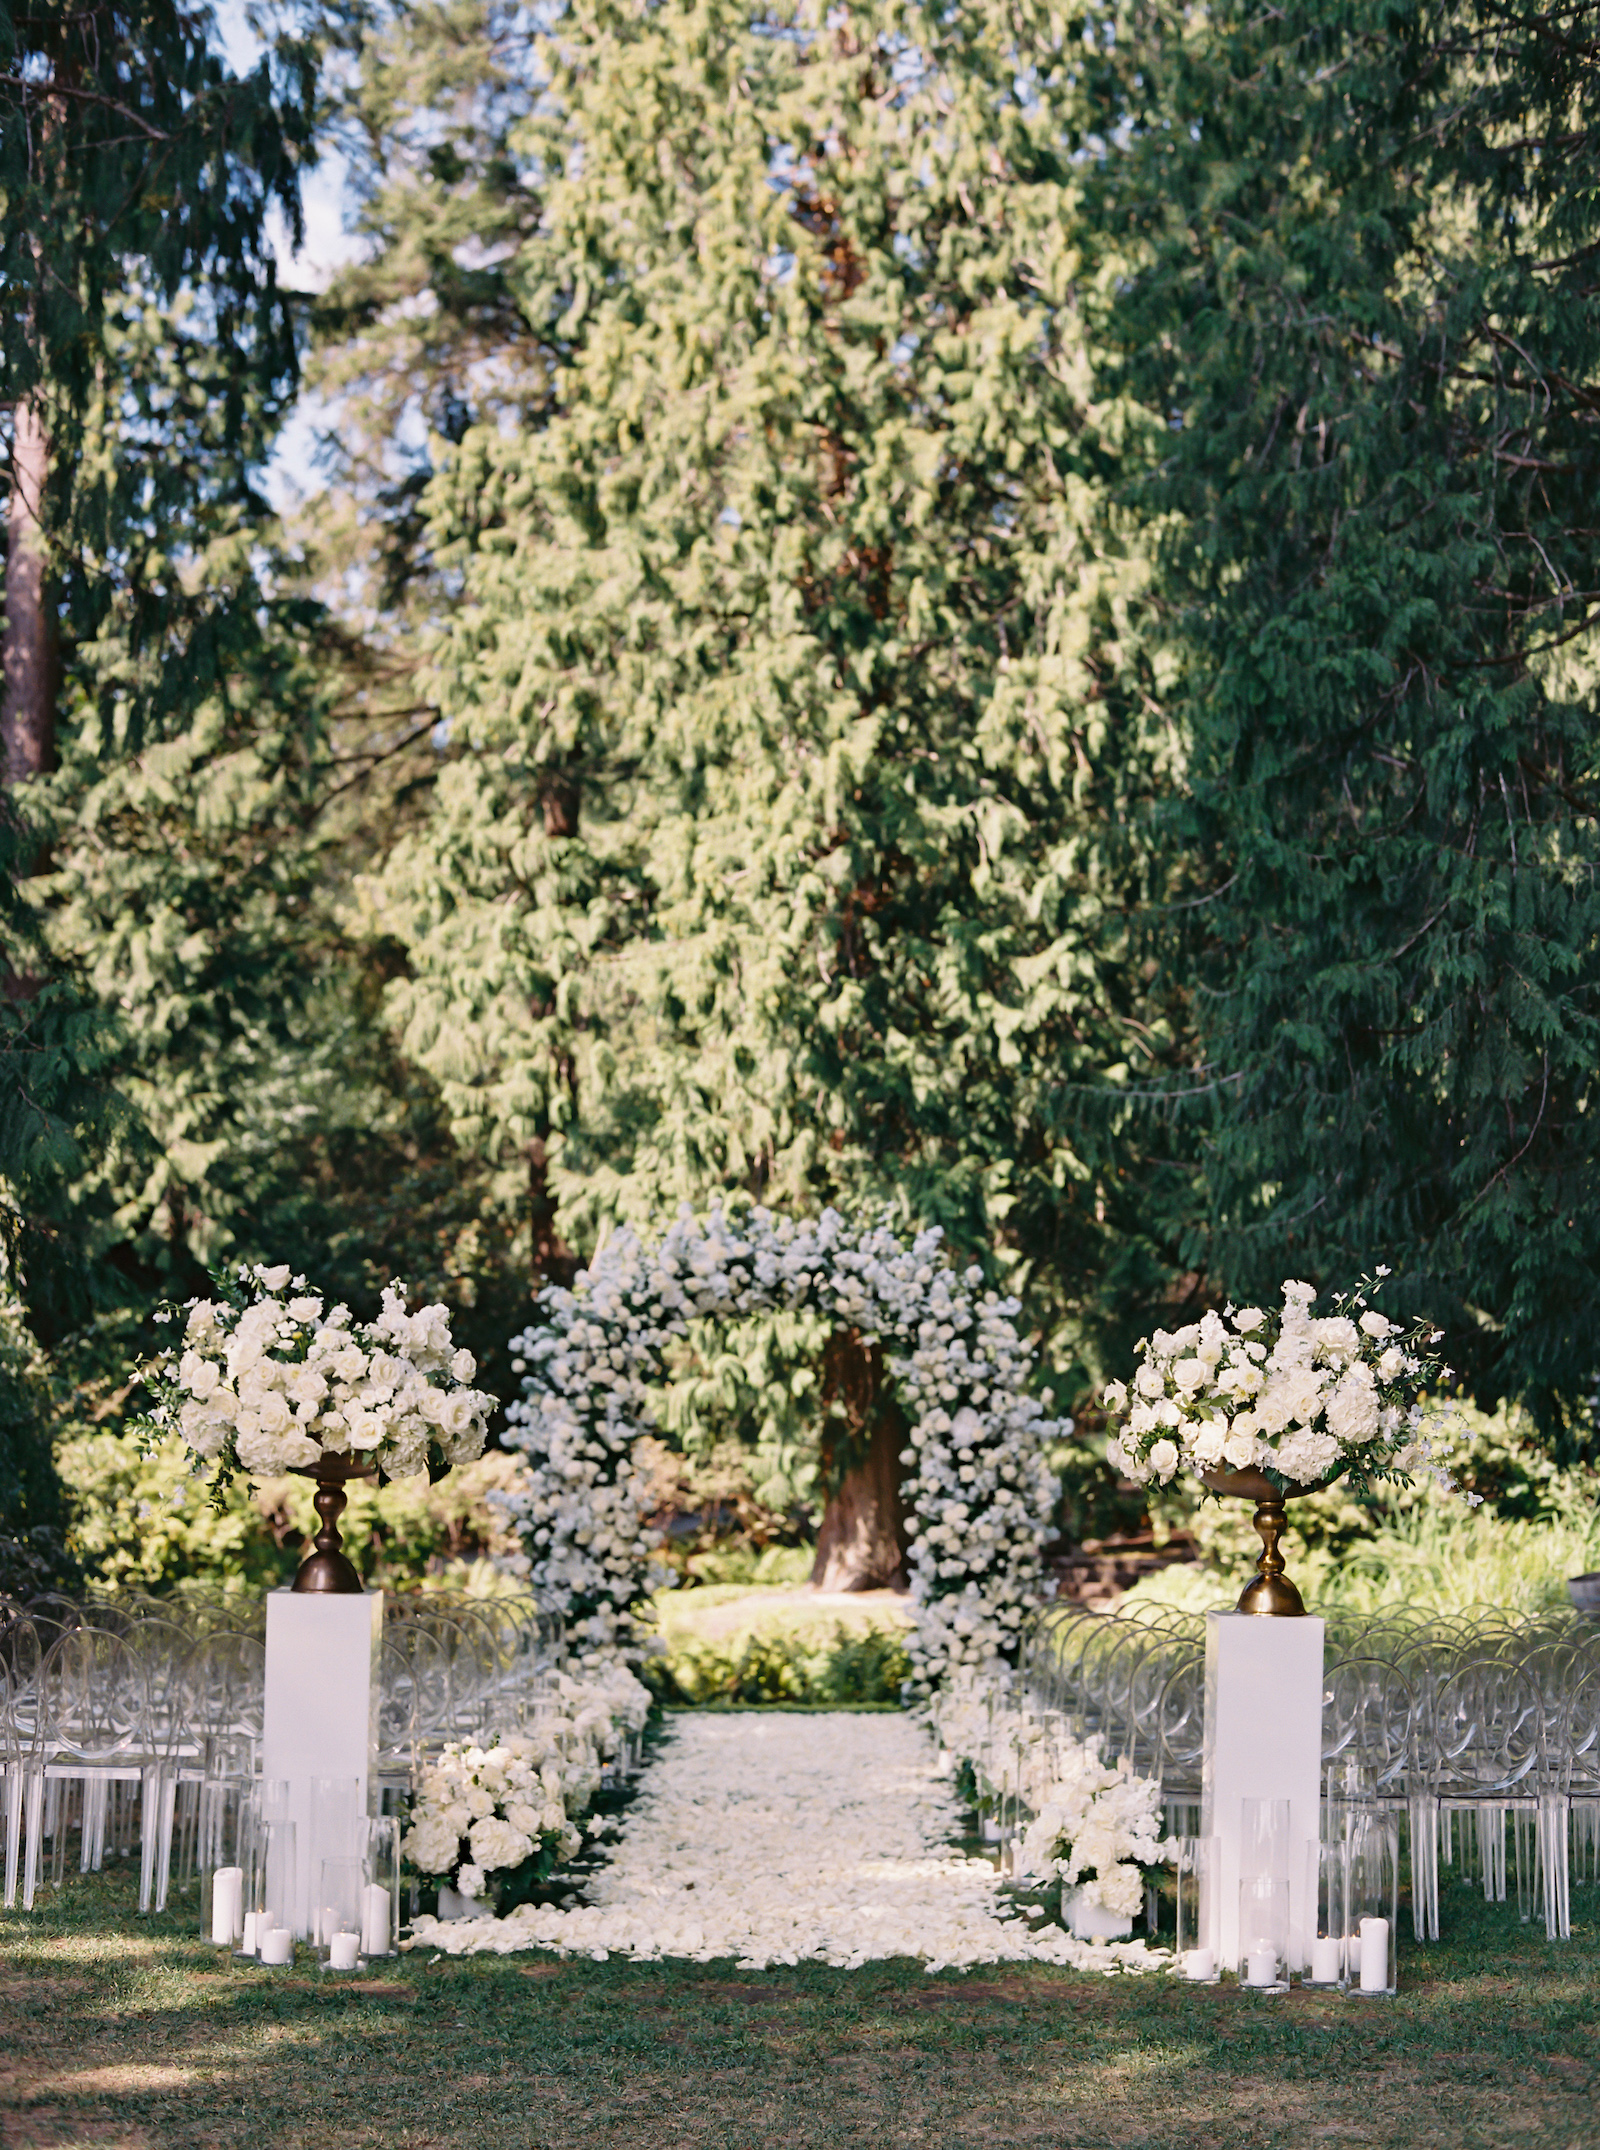 White wedding ceremony aisle and arch designed by Seattle Florist.